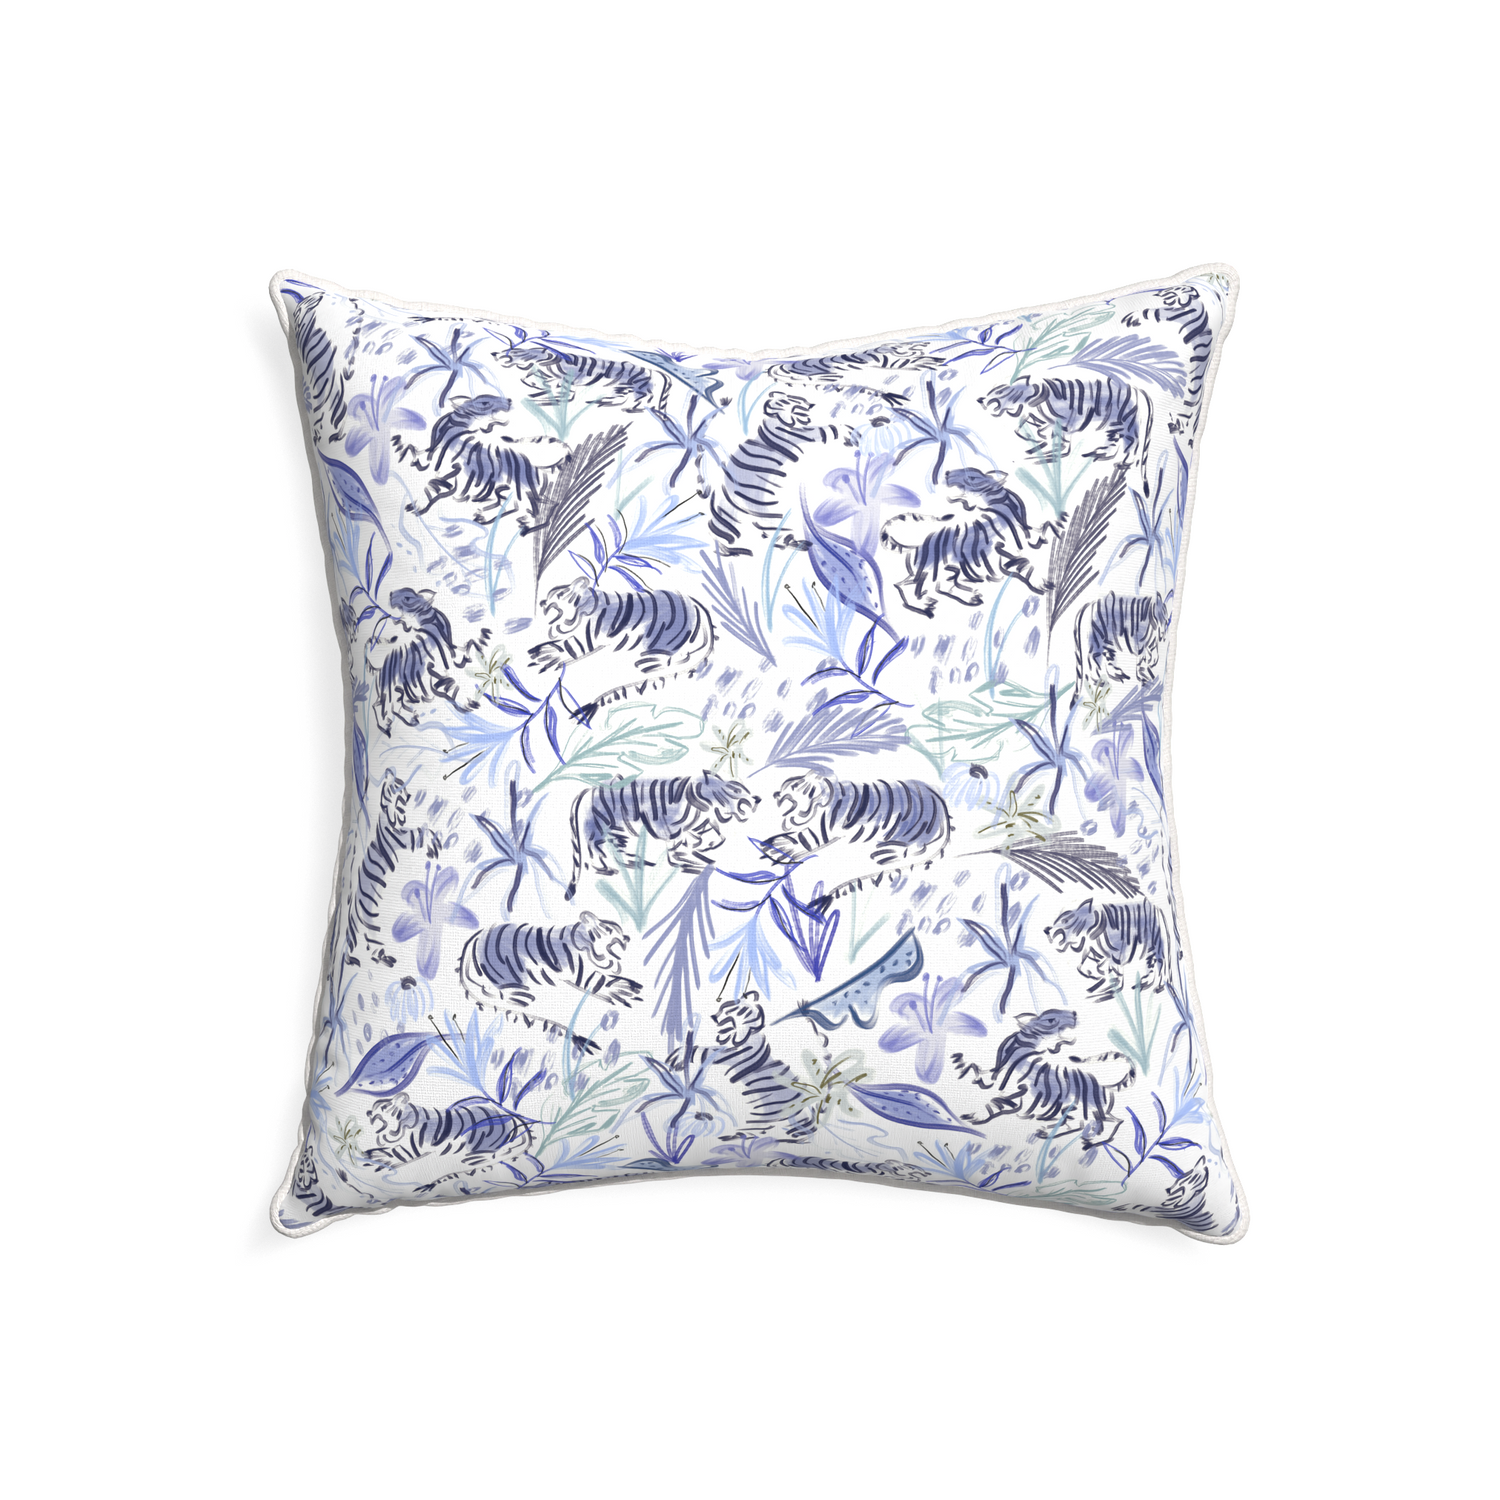 22-square frida blue custom blue with intricate tiger designpillow with snow piping on white background